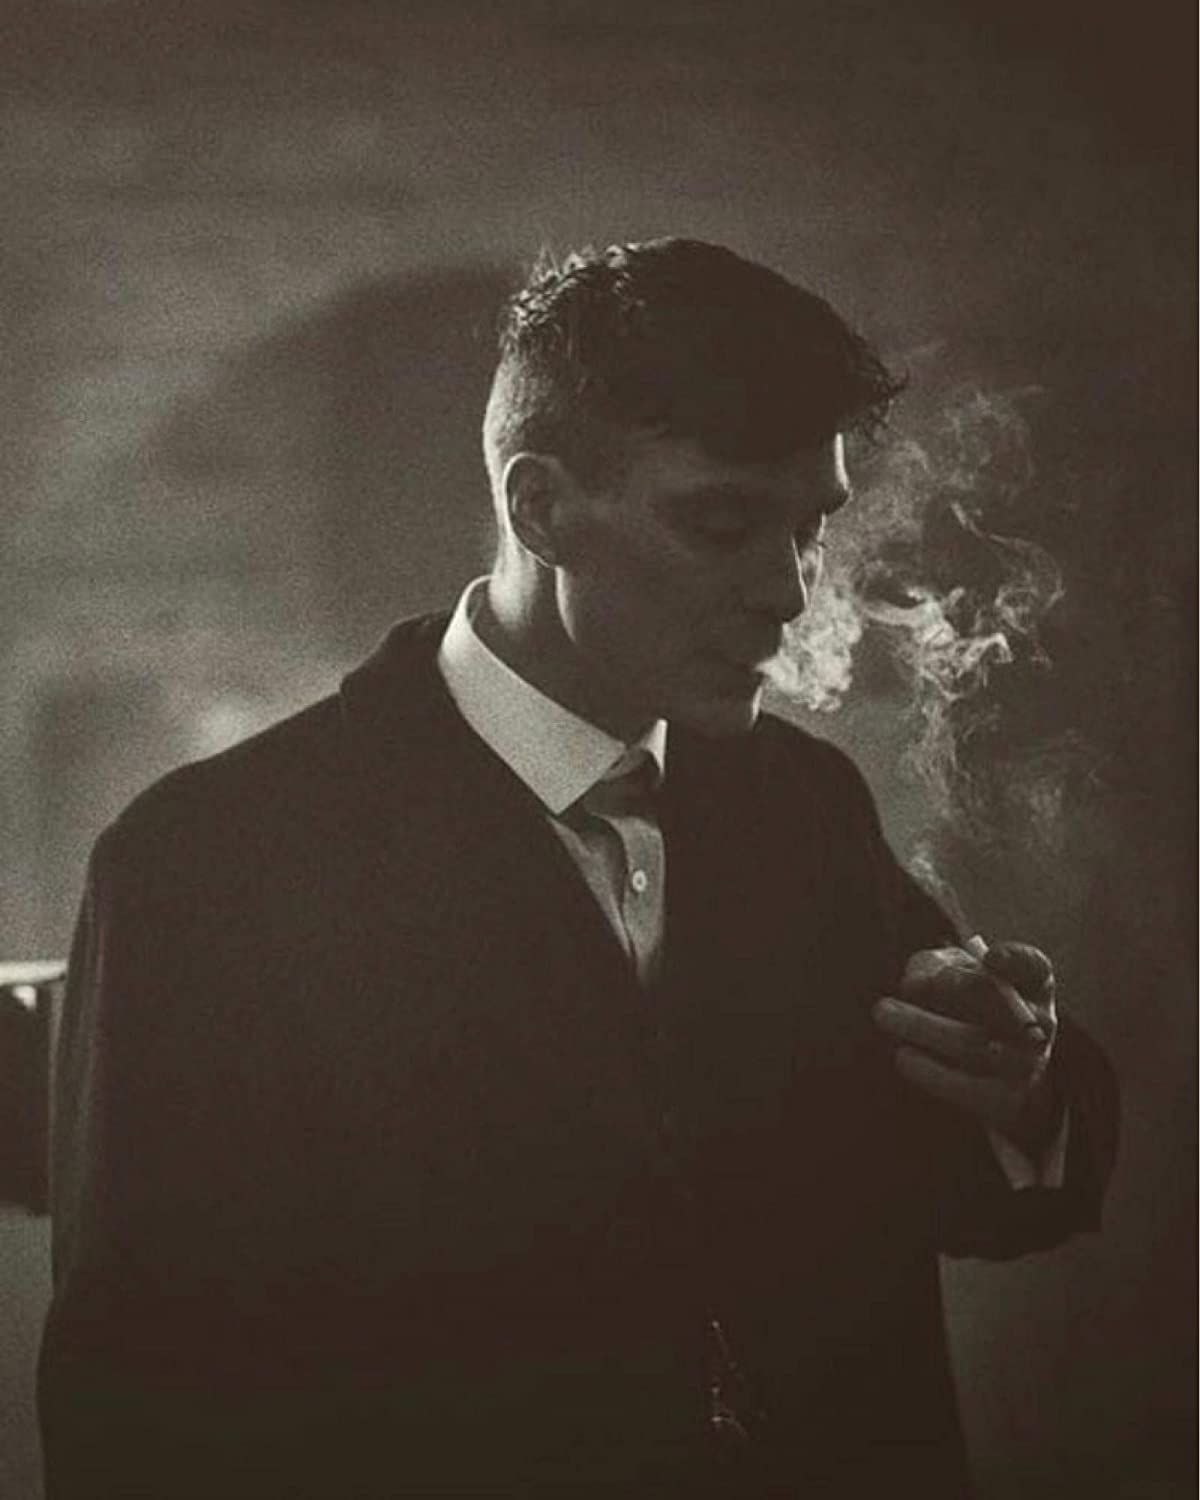 Peaky Blinders Poster Wall Decor Peaky Blinders Wall Print Wallpapers Tommy Shelby Home Decor: Handmade